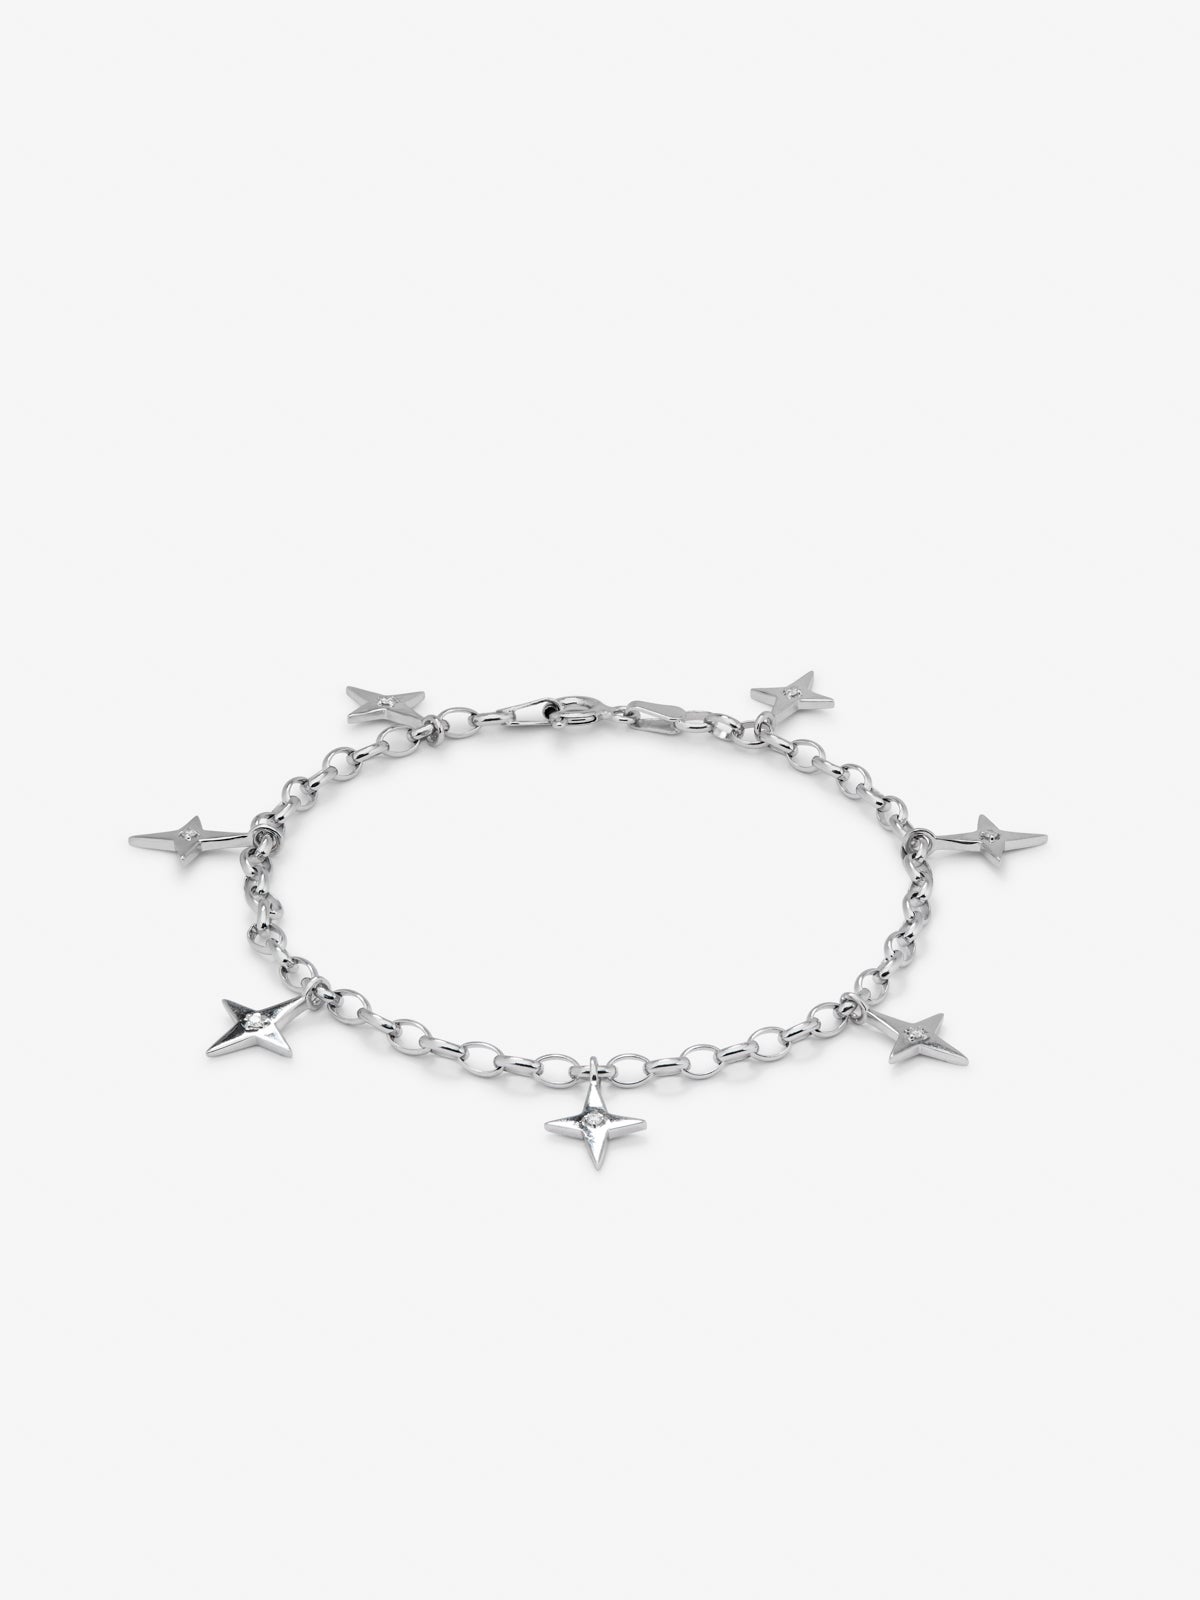 925 silver bracelet with stars and 7 brilliant-cut diamonds with a total of 0.05 cts